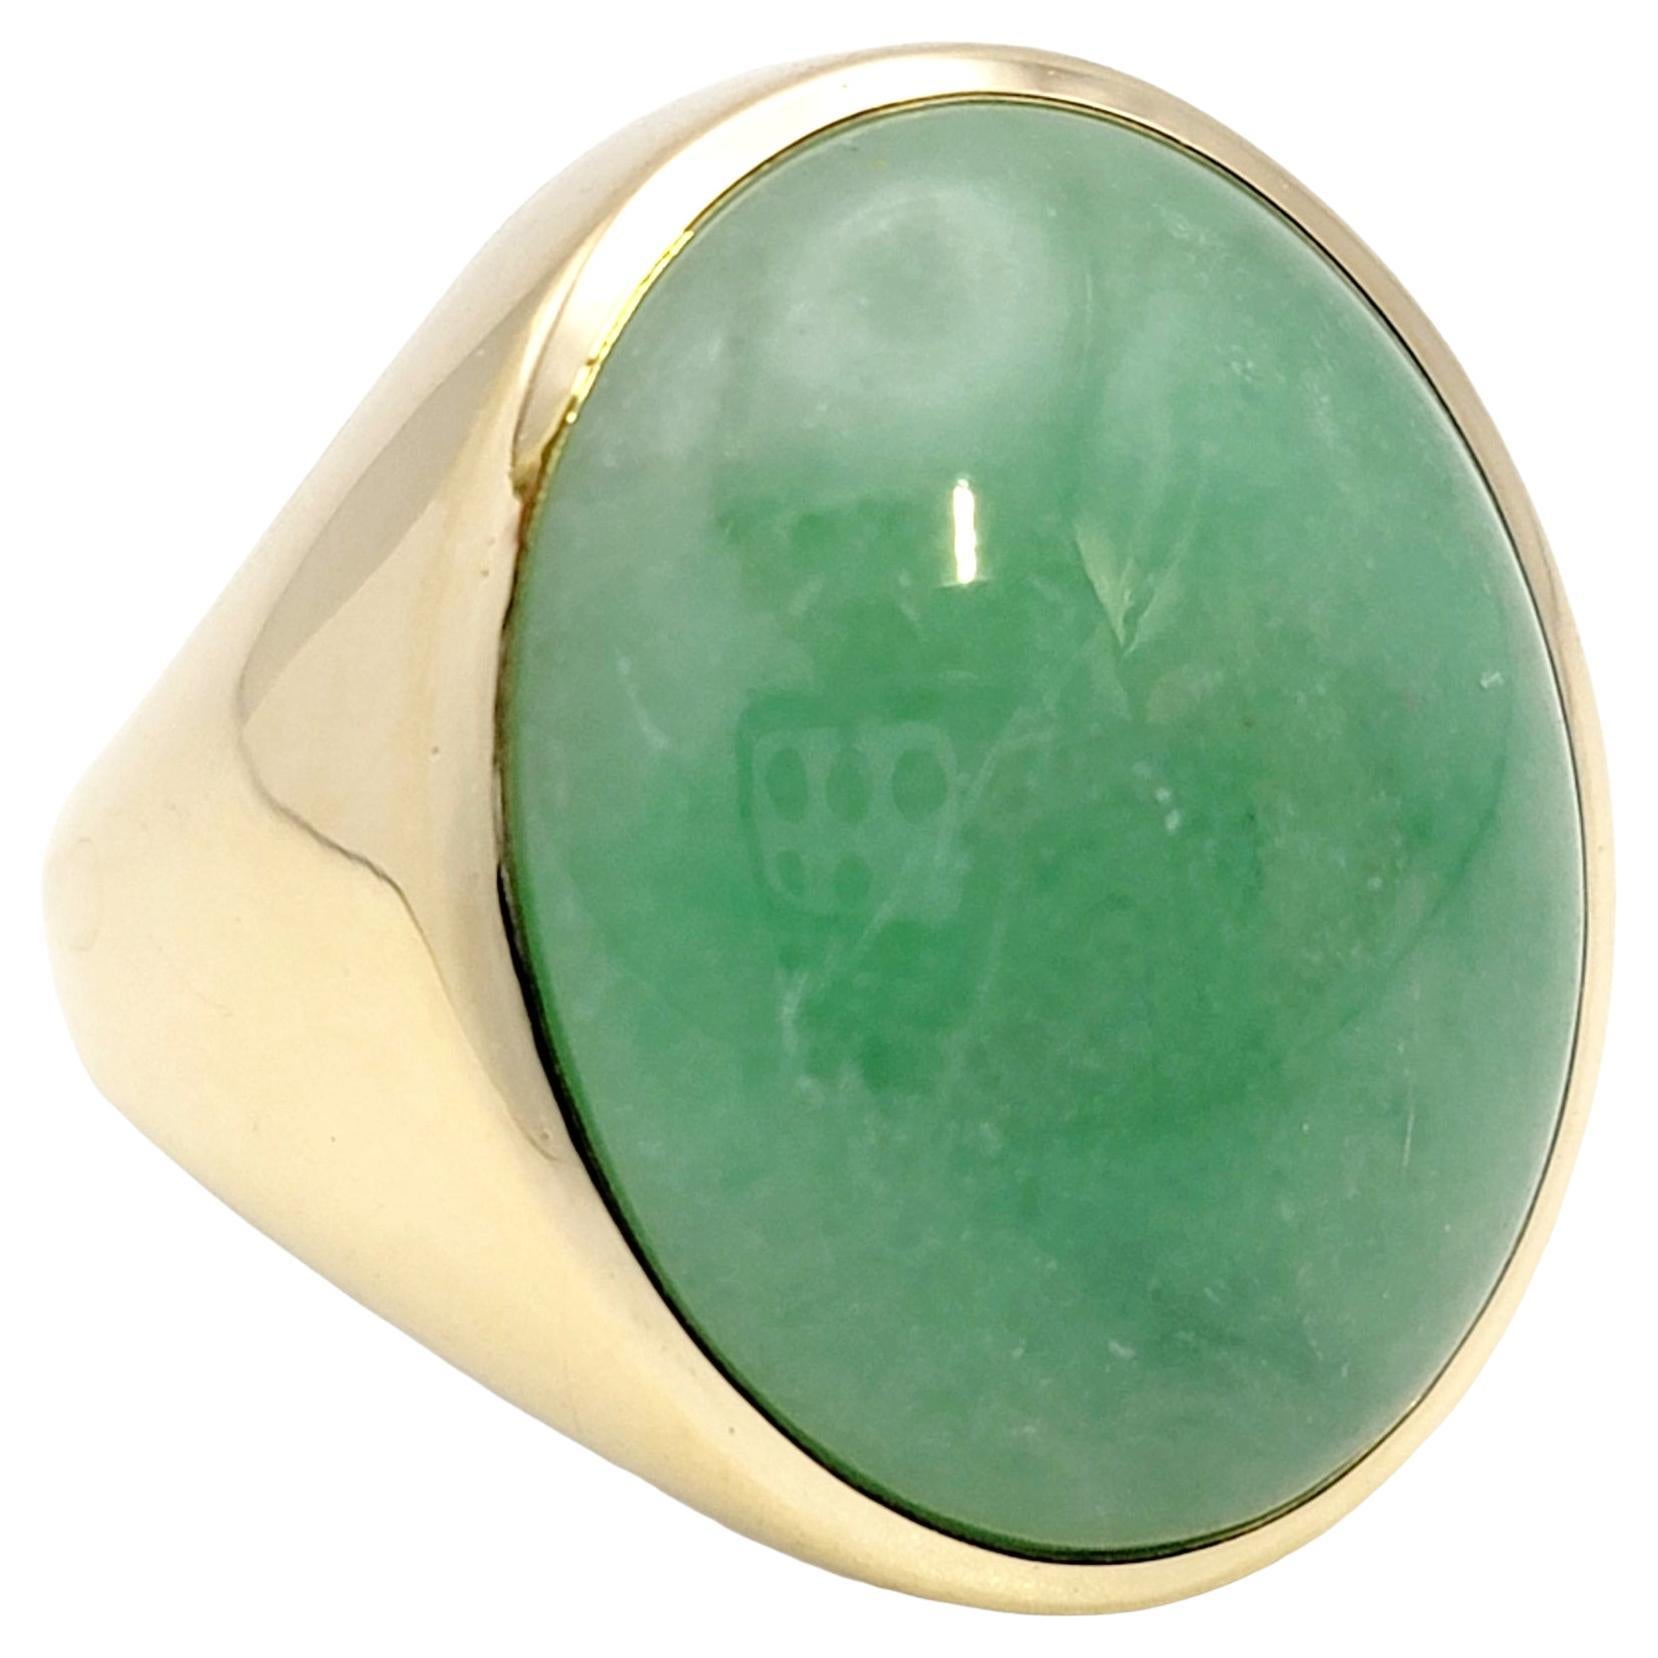 Solitaire Oval Cabochon Light Green Jadeite Ring in 14 Karat Yellow Gold Unisex